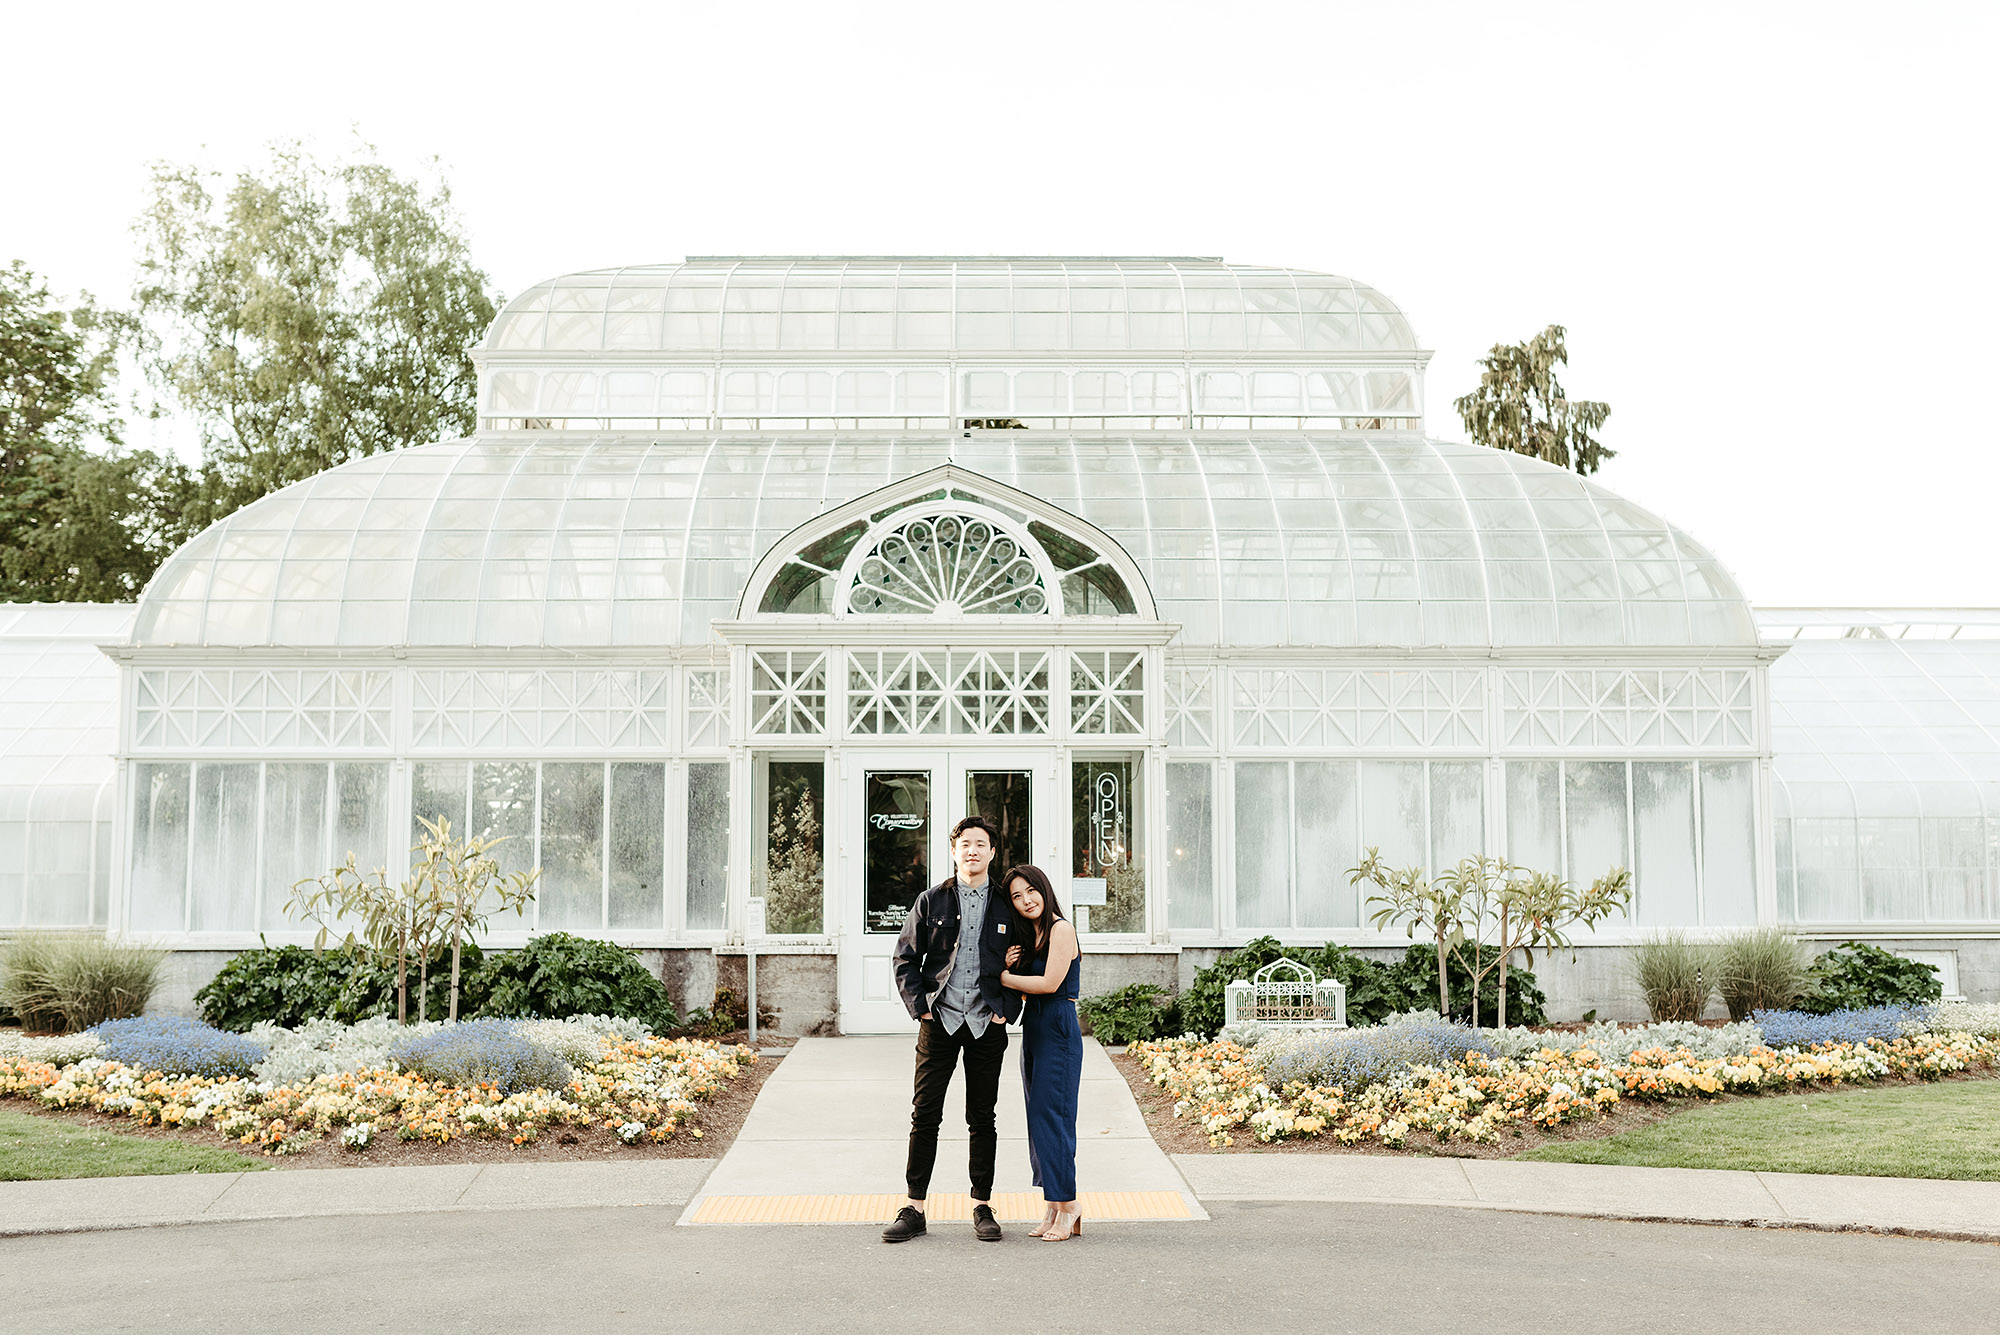 Engagement Portraits at the Volunteer Conservatory in Seattle